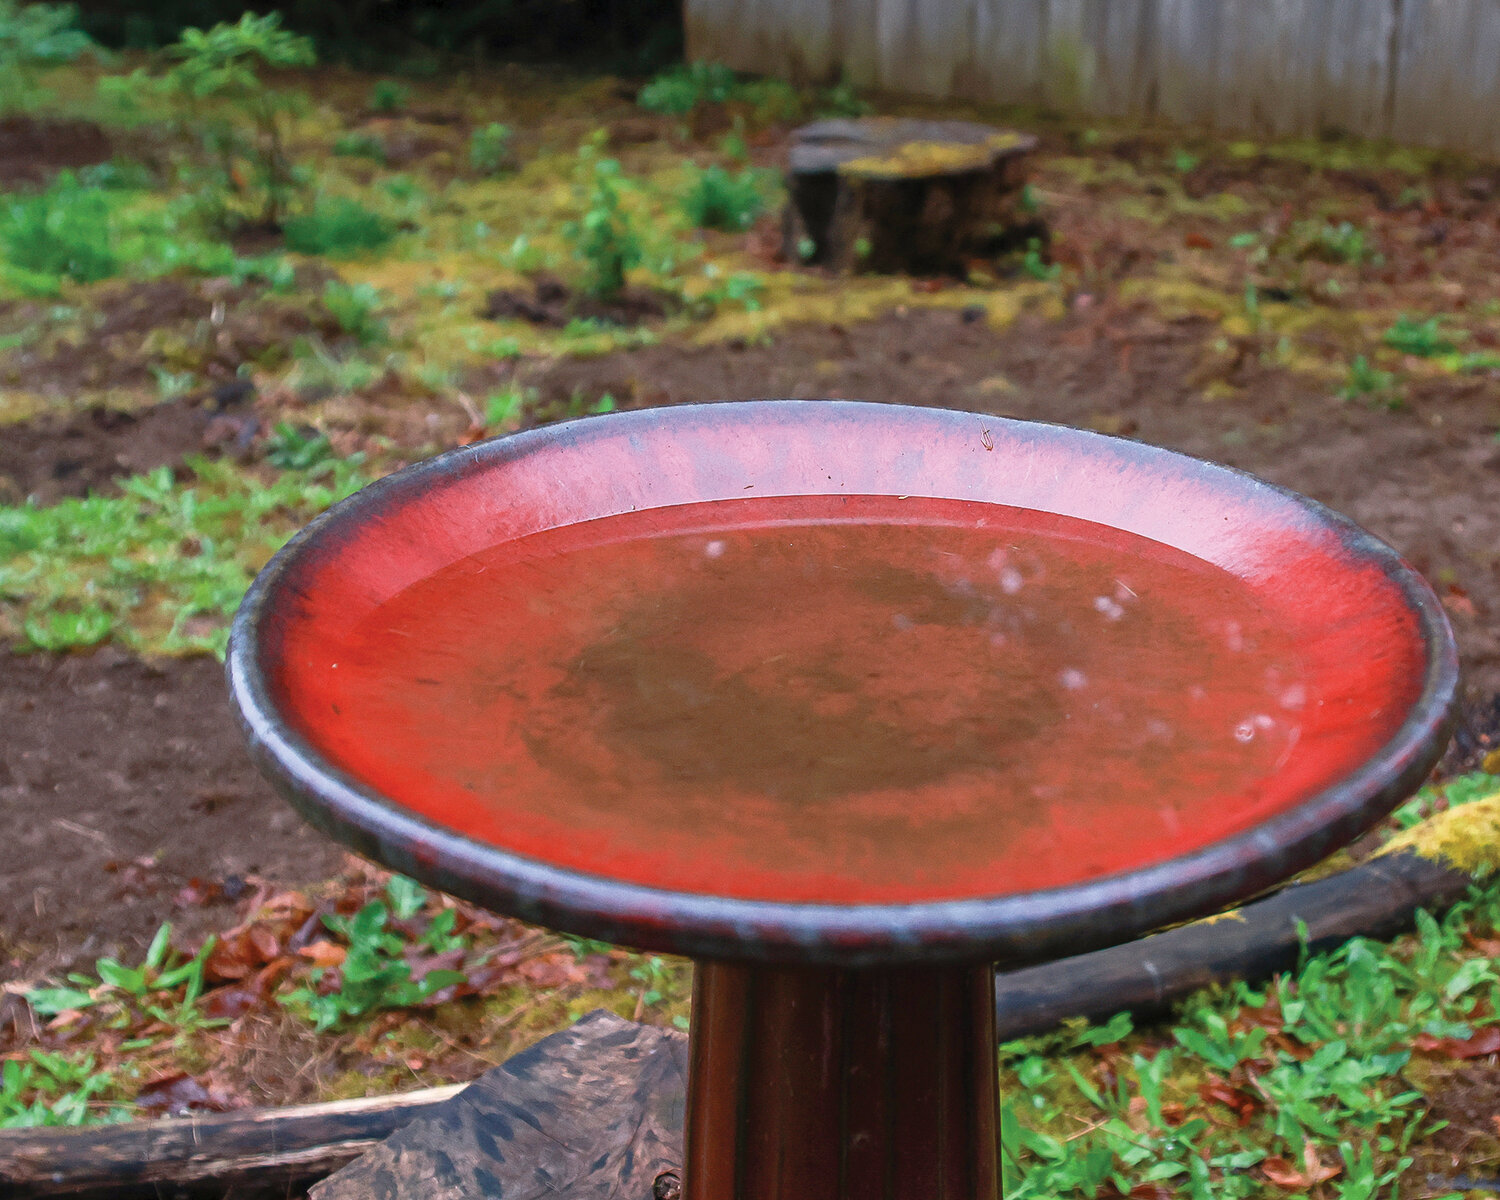 It is strongly suggested that bird baths be cleaned on a weekly basis to eliminate mosquito larvae.